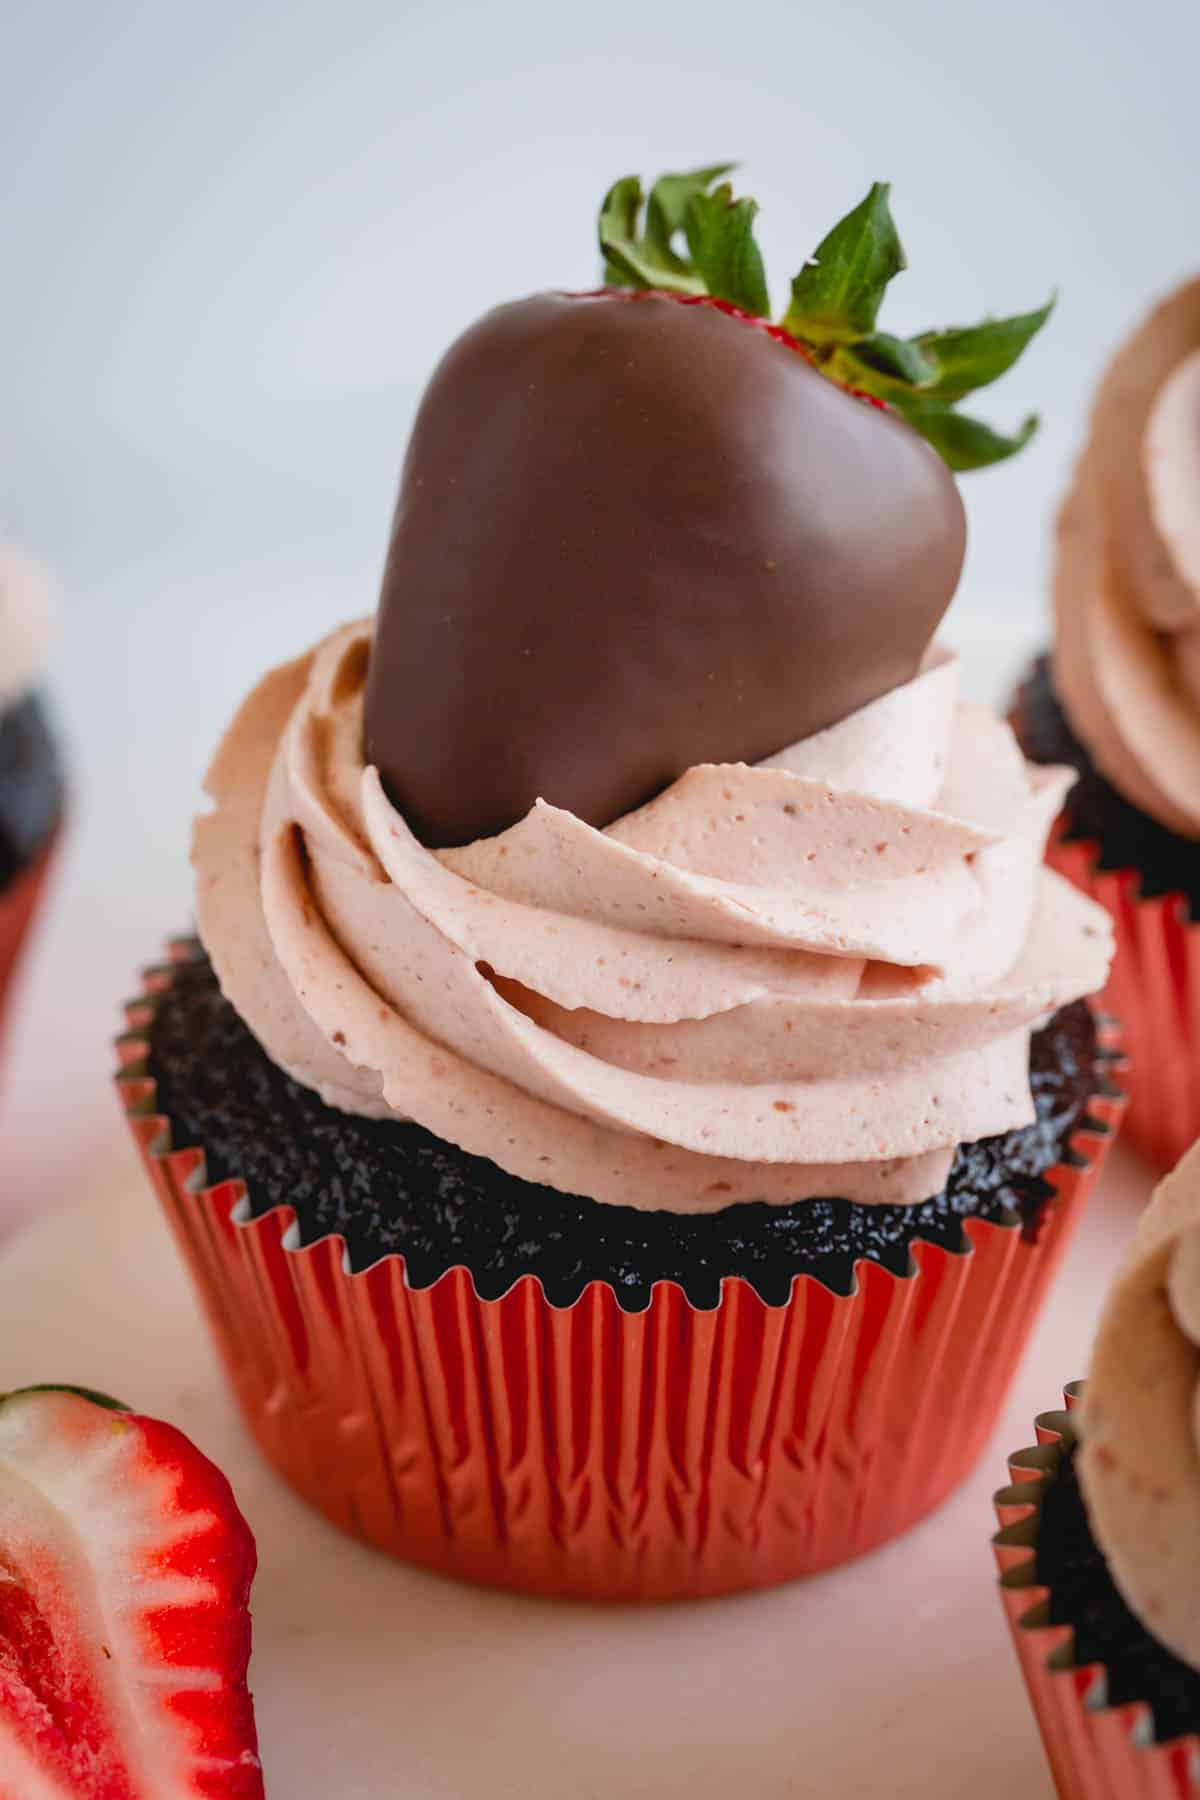 A chocolate cupcake topped with strawberry whipped cream frosting and a chocolate covered strawberry.